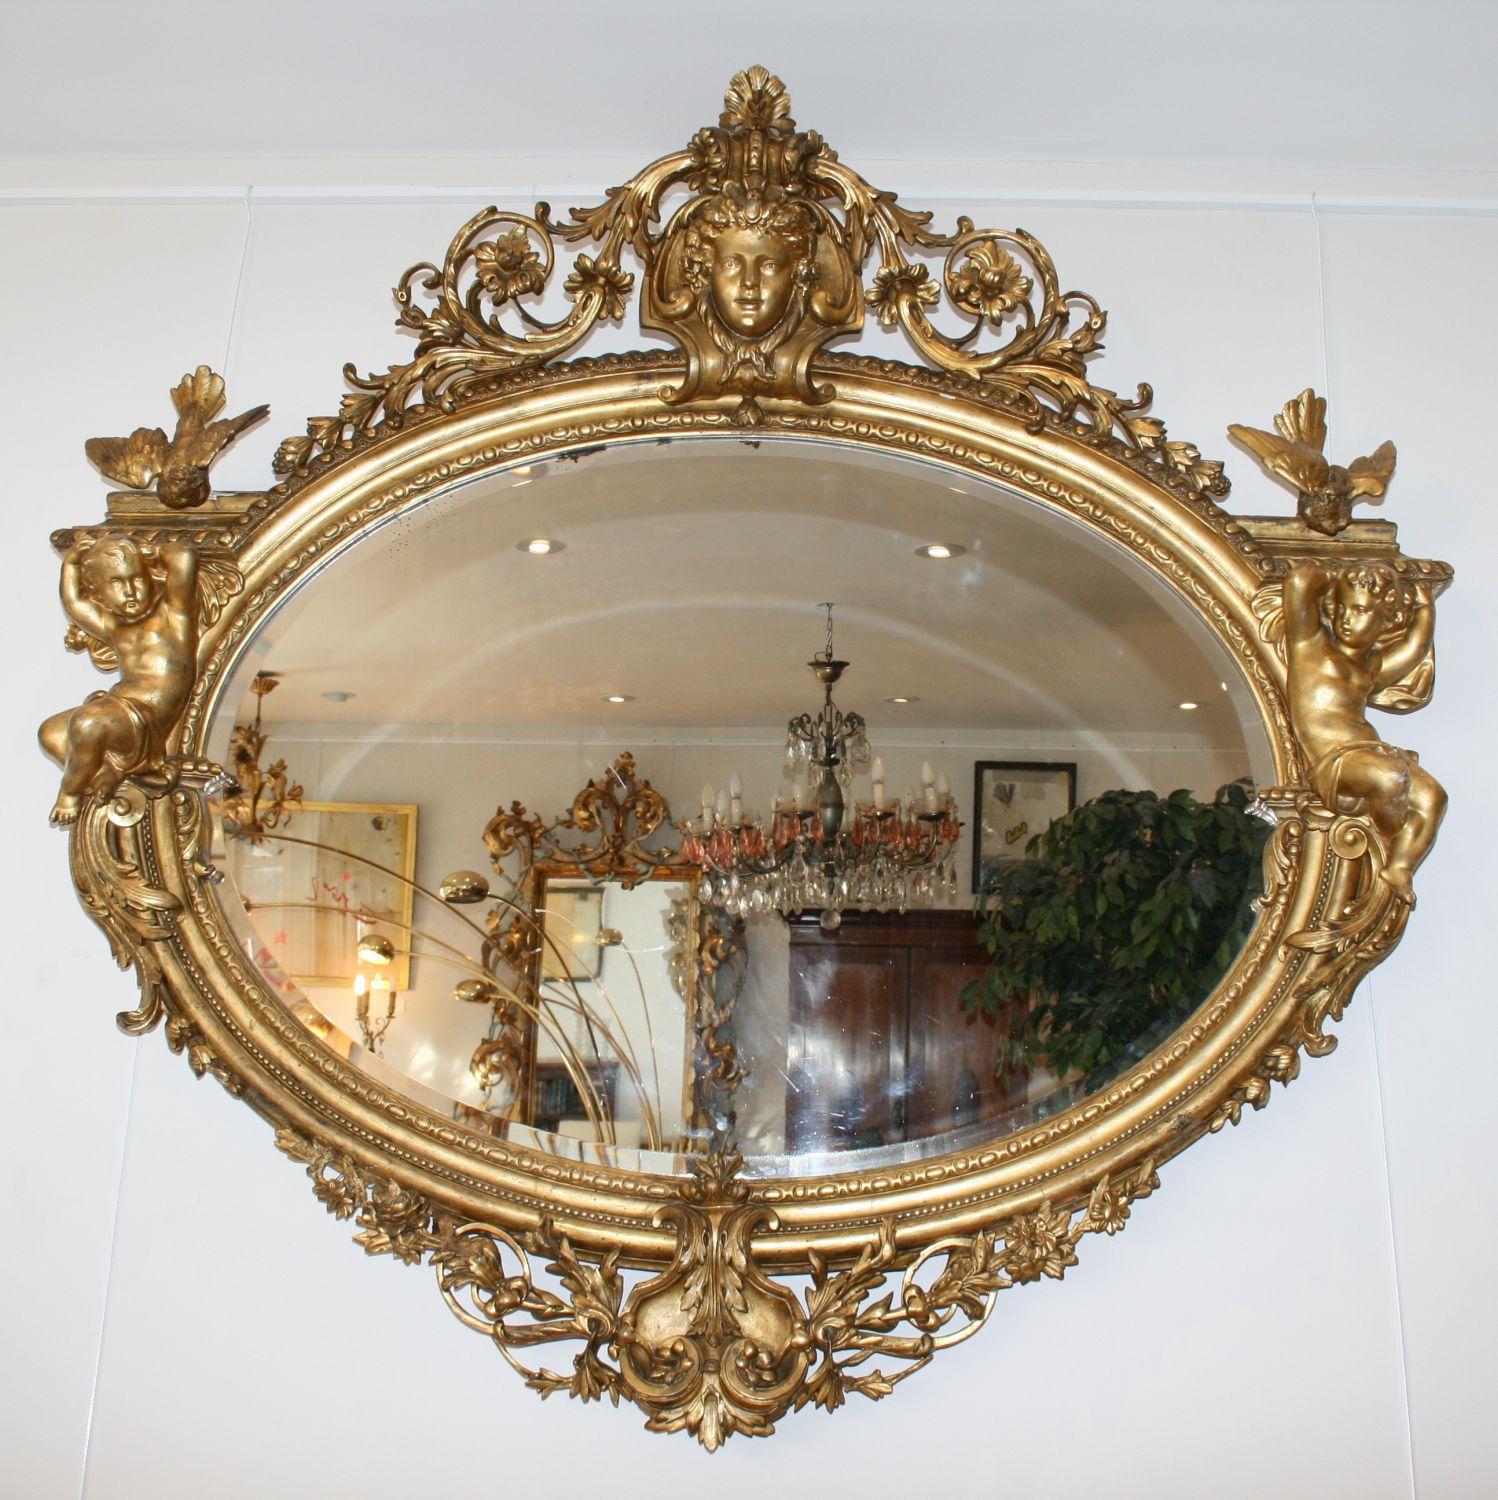 This very large antique giltwood and gesso mirror has some fabulous details, but unfortunately the images do not do it justice and it really needs to be seen in person.

It’s early to mid-19th century, either French or Italian and has the original